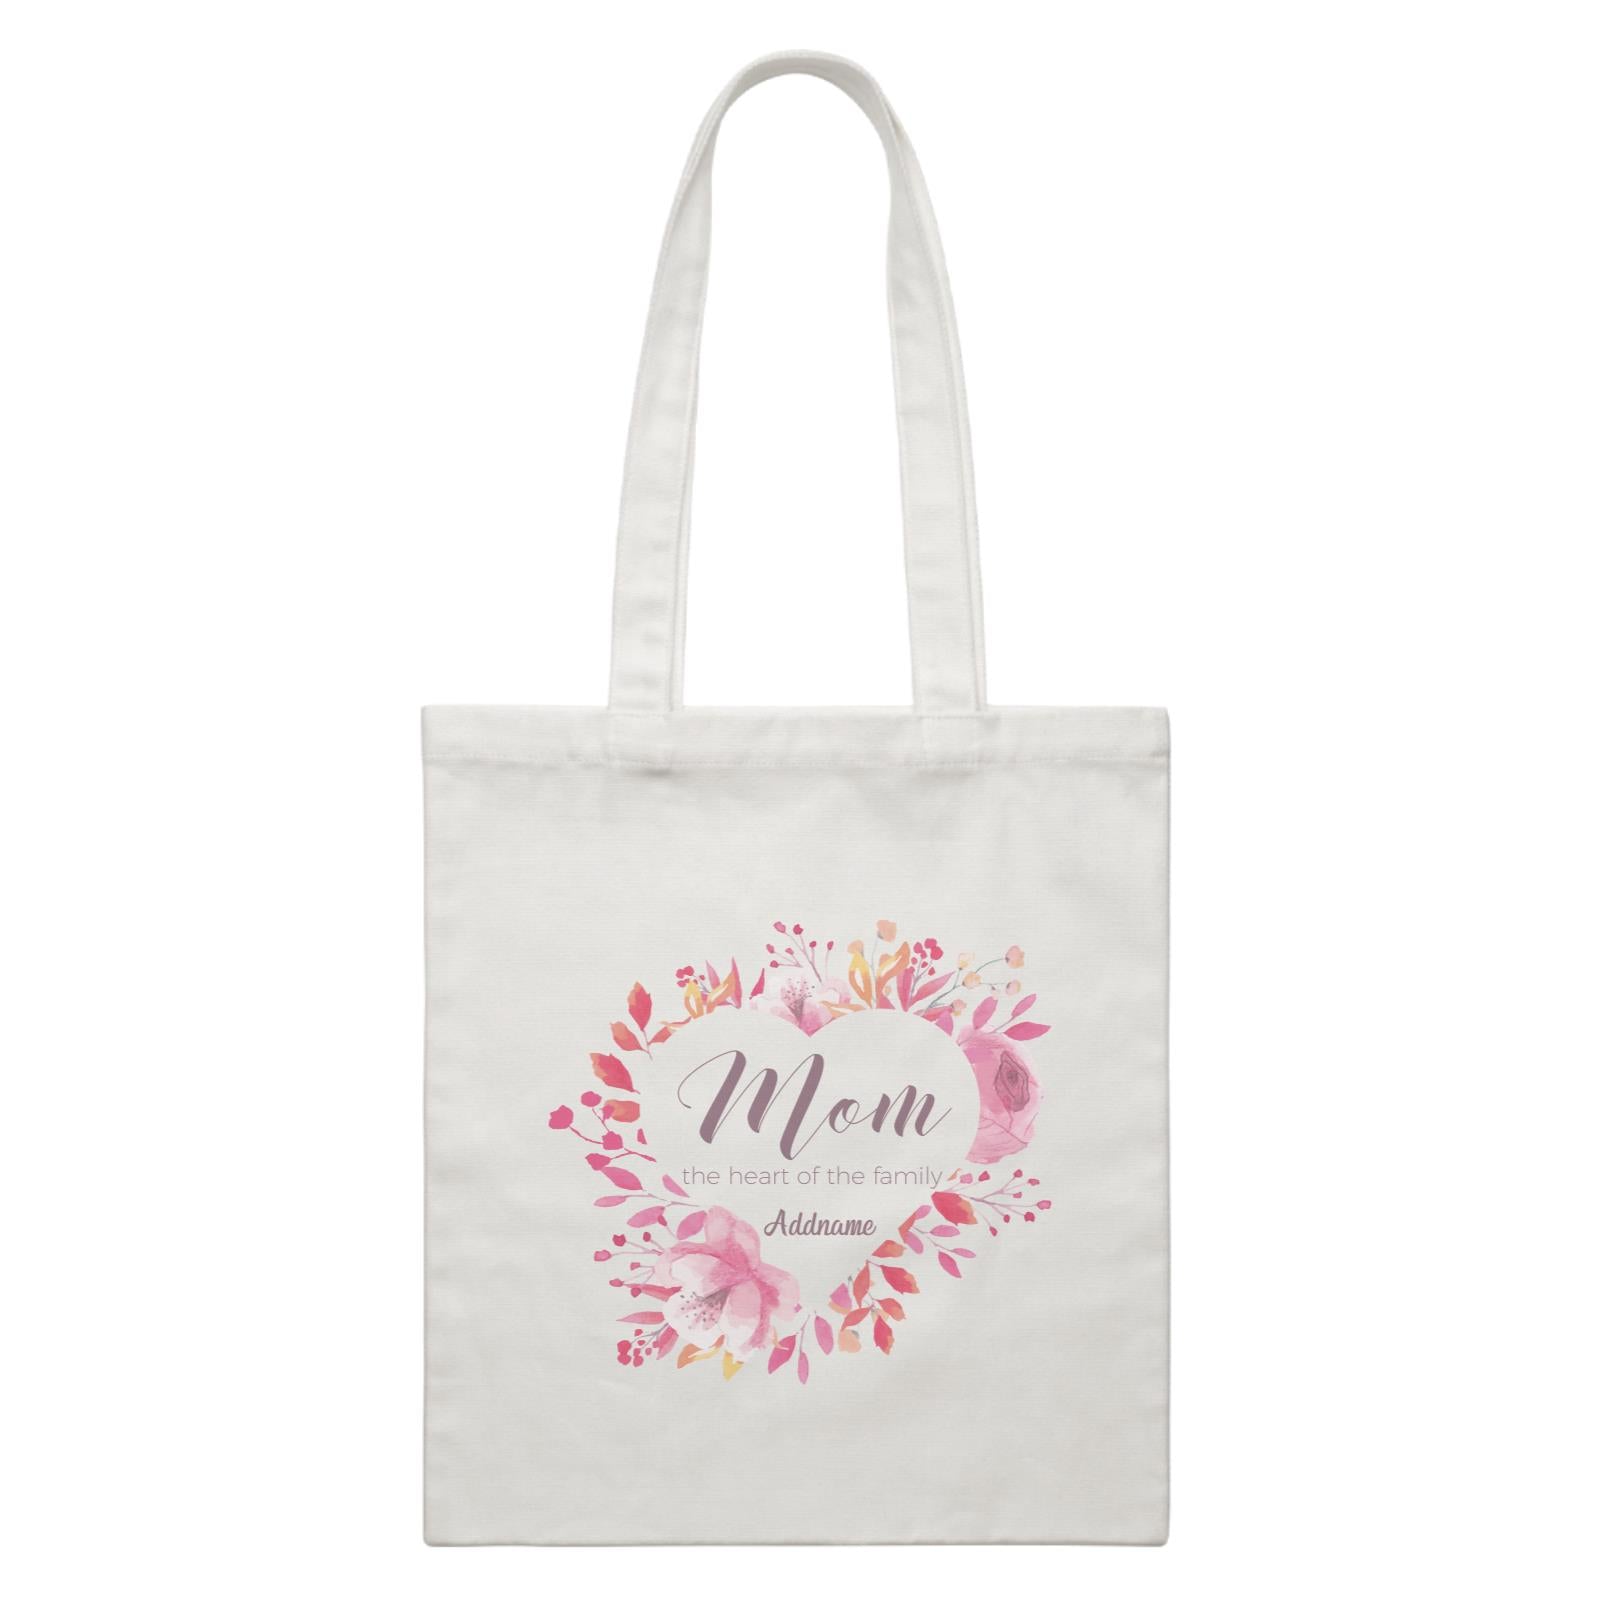 Sweet Mom Heart Mom The Heart of The Family Addname White Canvas Bag